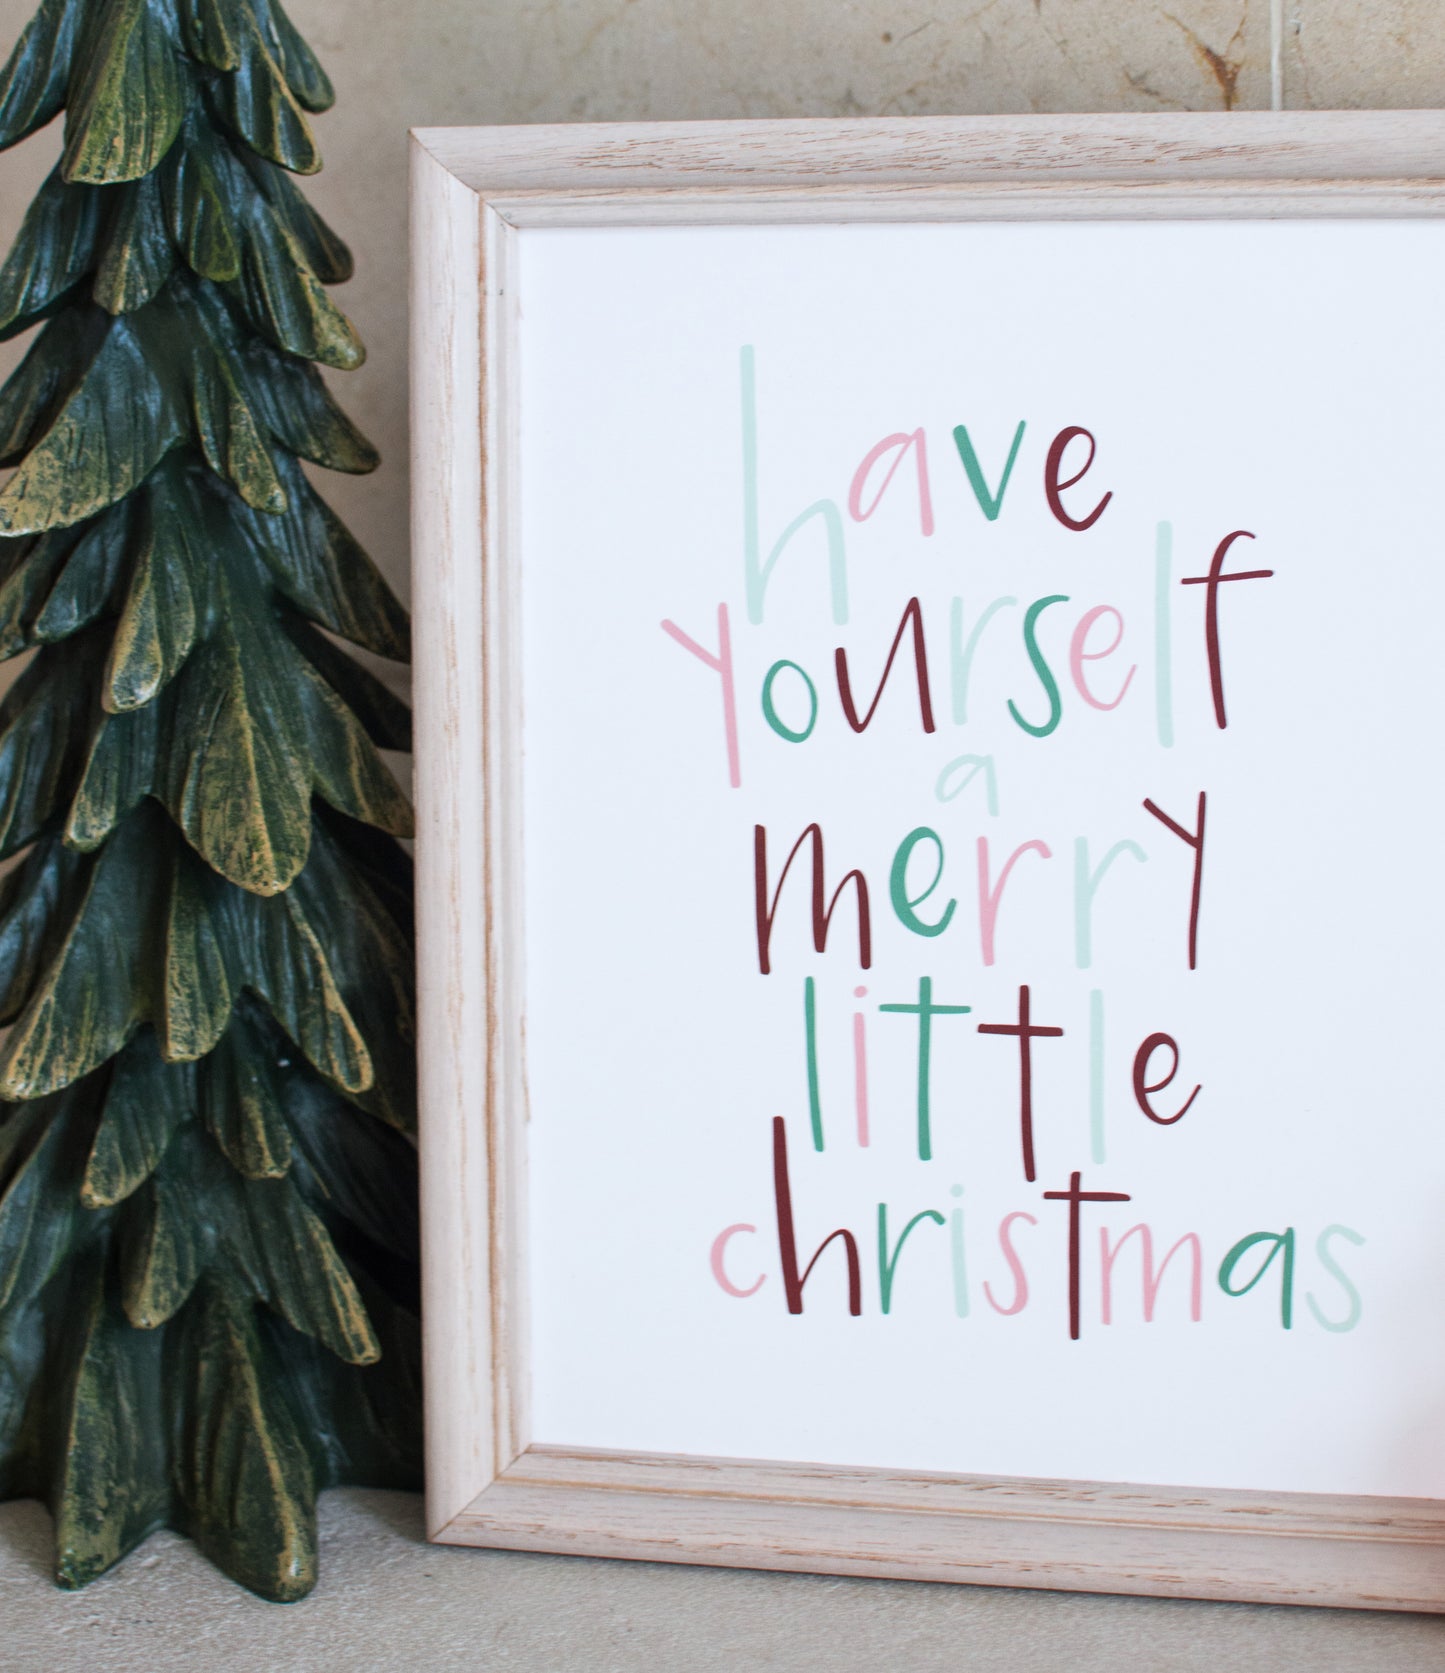 Have Yourself a Merry Little Christmas Print